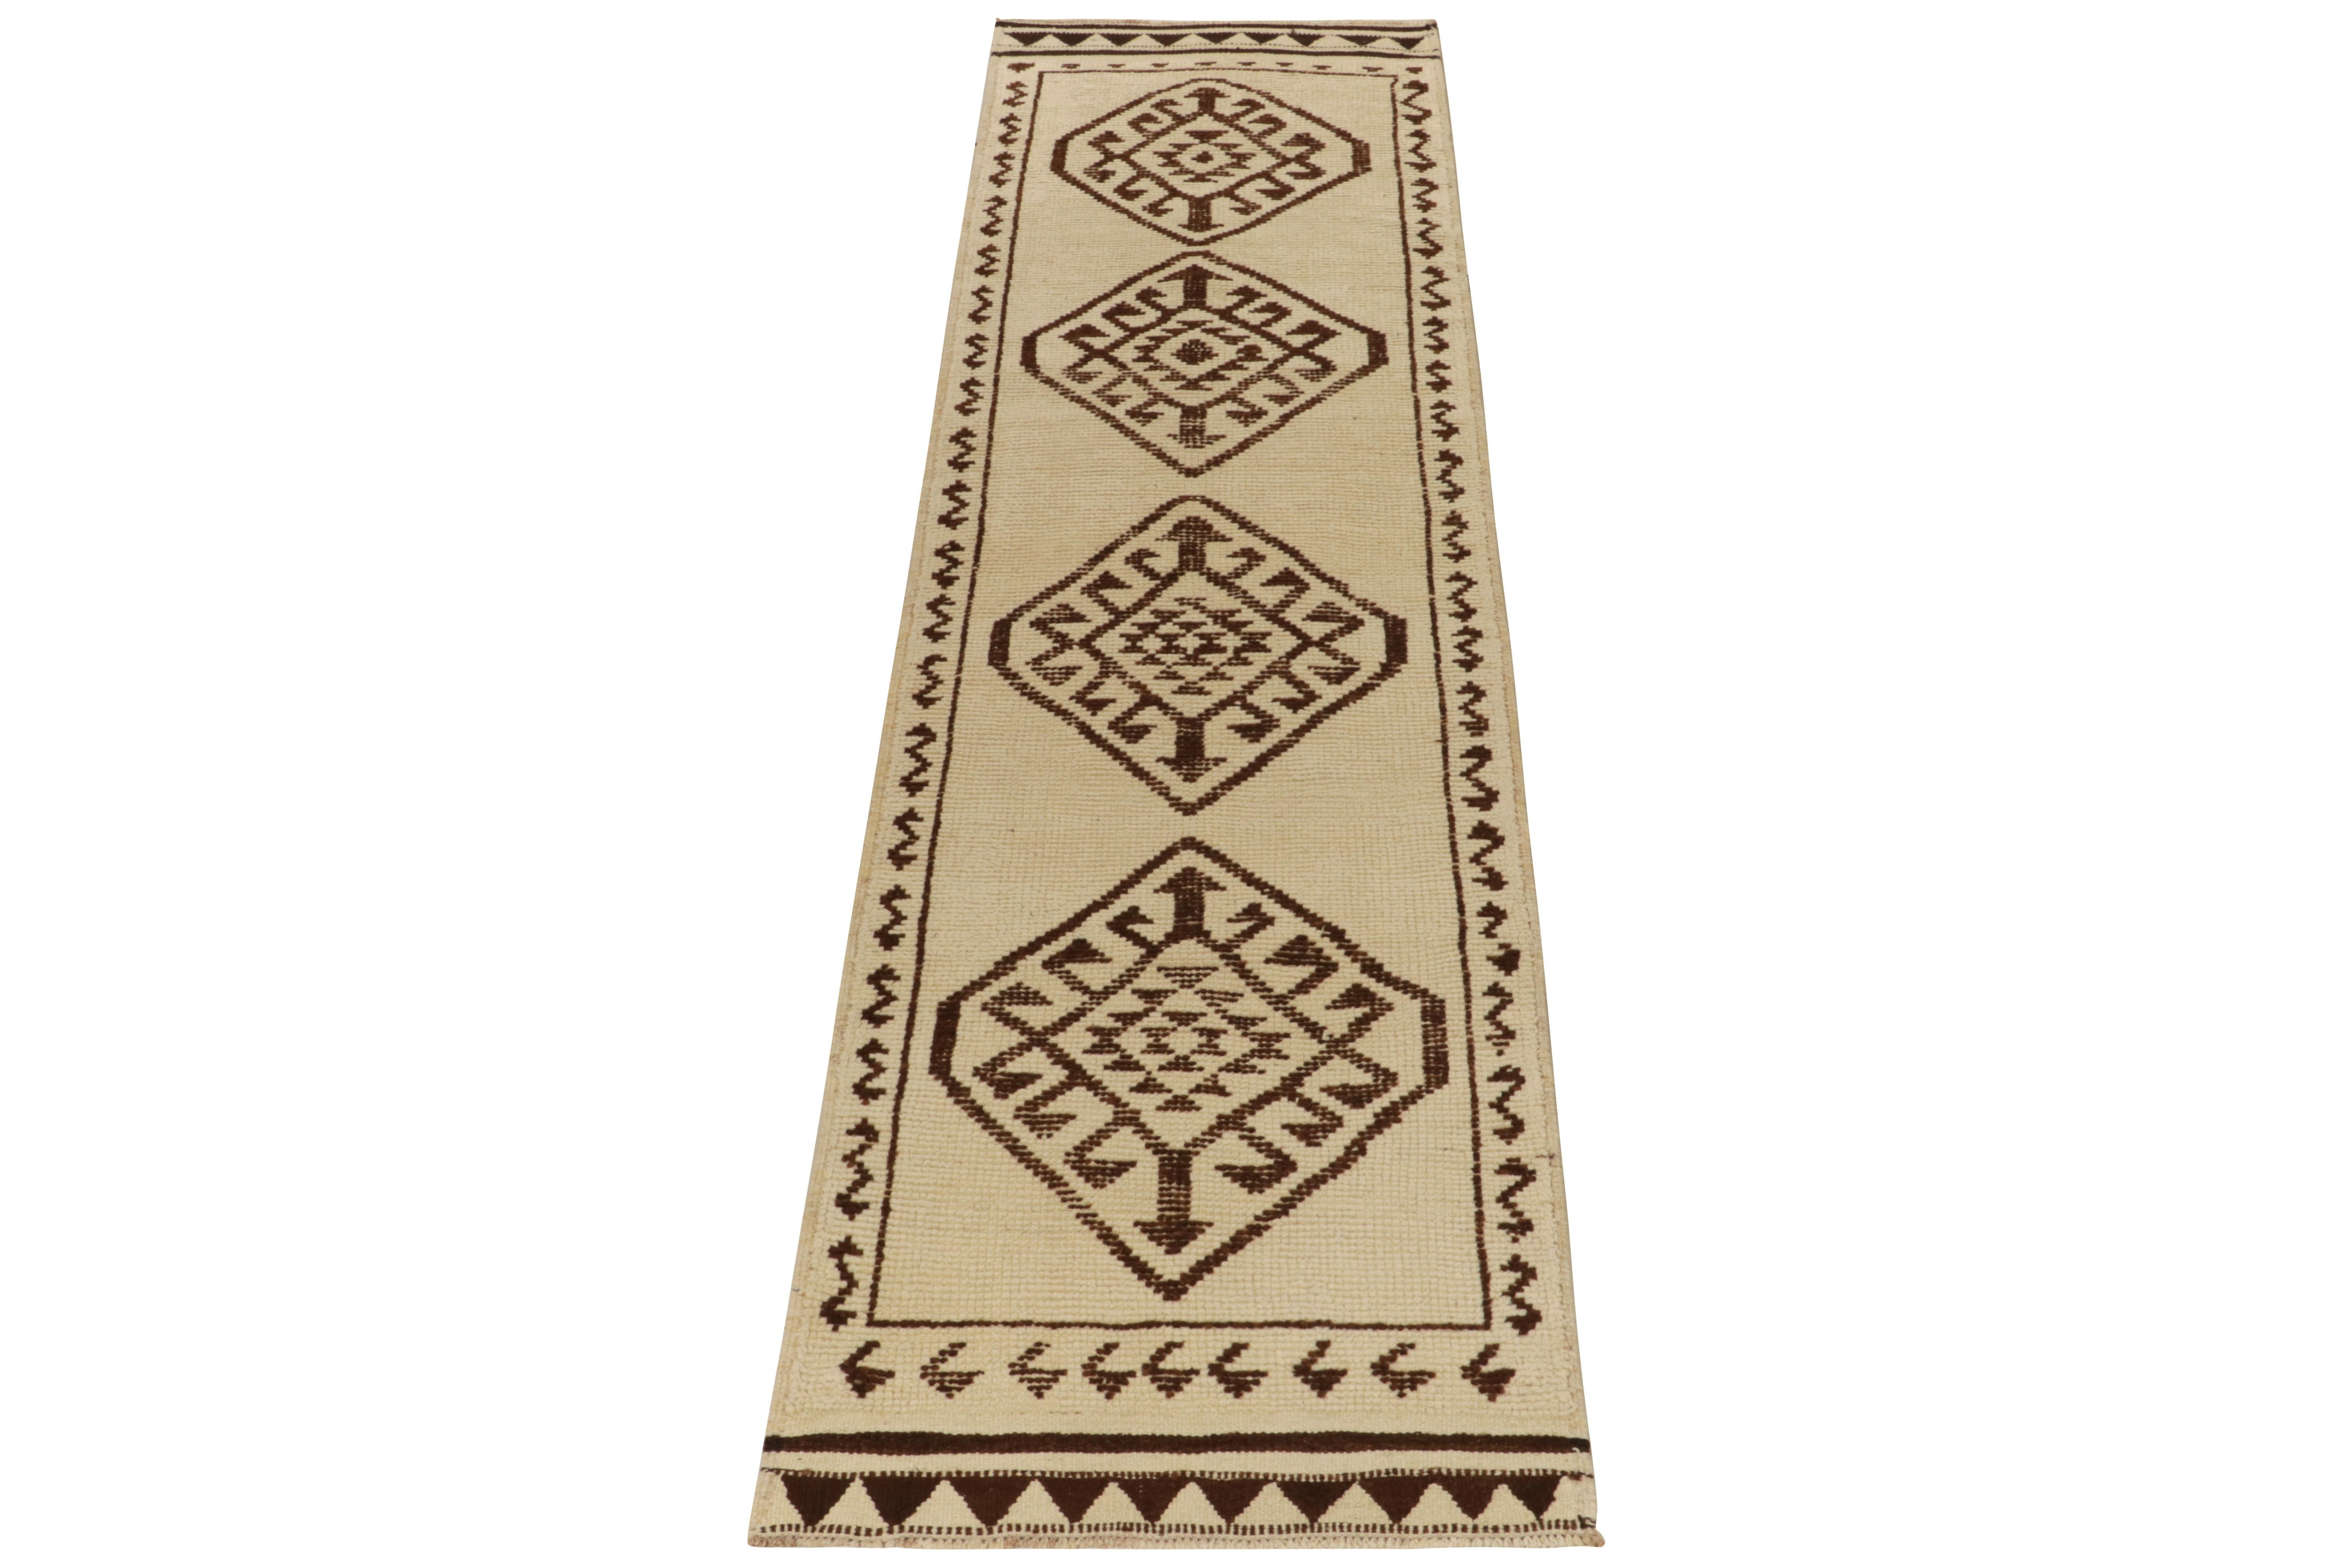 From our vintage selections, a 3x12 hand-knotted runner bearing clean nomadic aesthetics. 

This particular 1950s tribal piece showcases traditional motifs neatly decorating the field in comfortable beige browns, further attributing to the